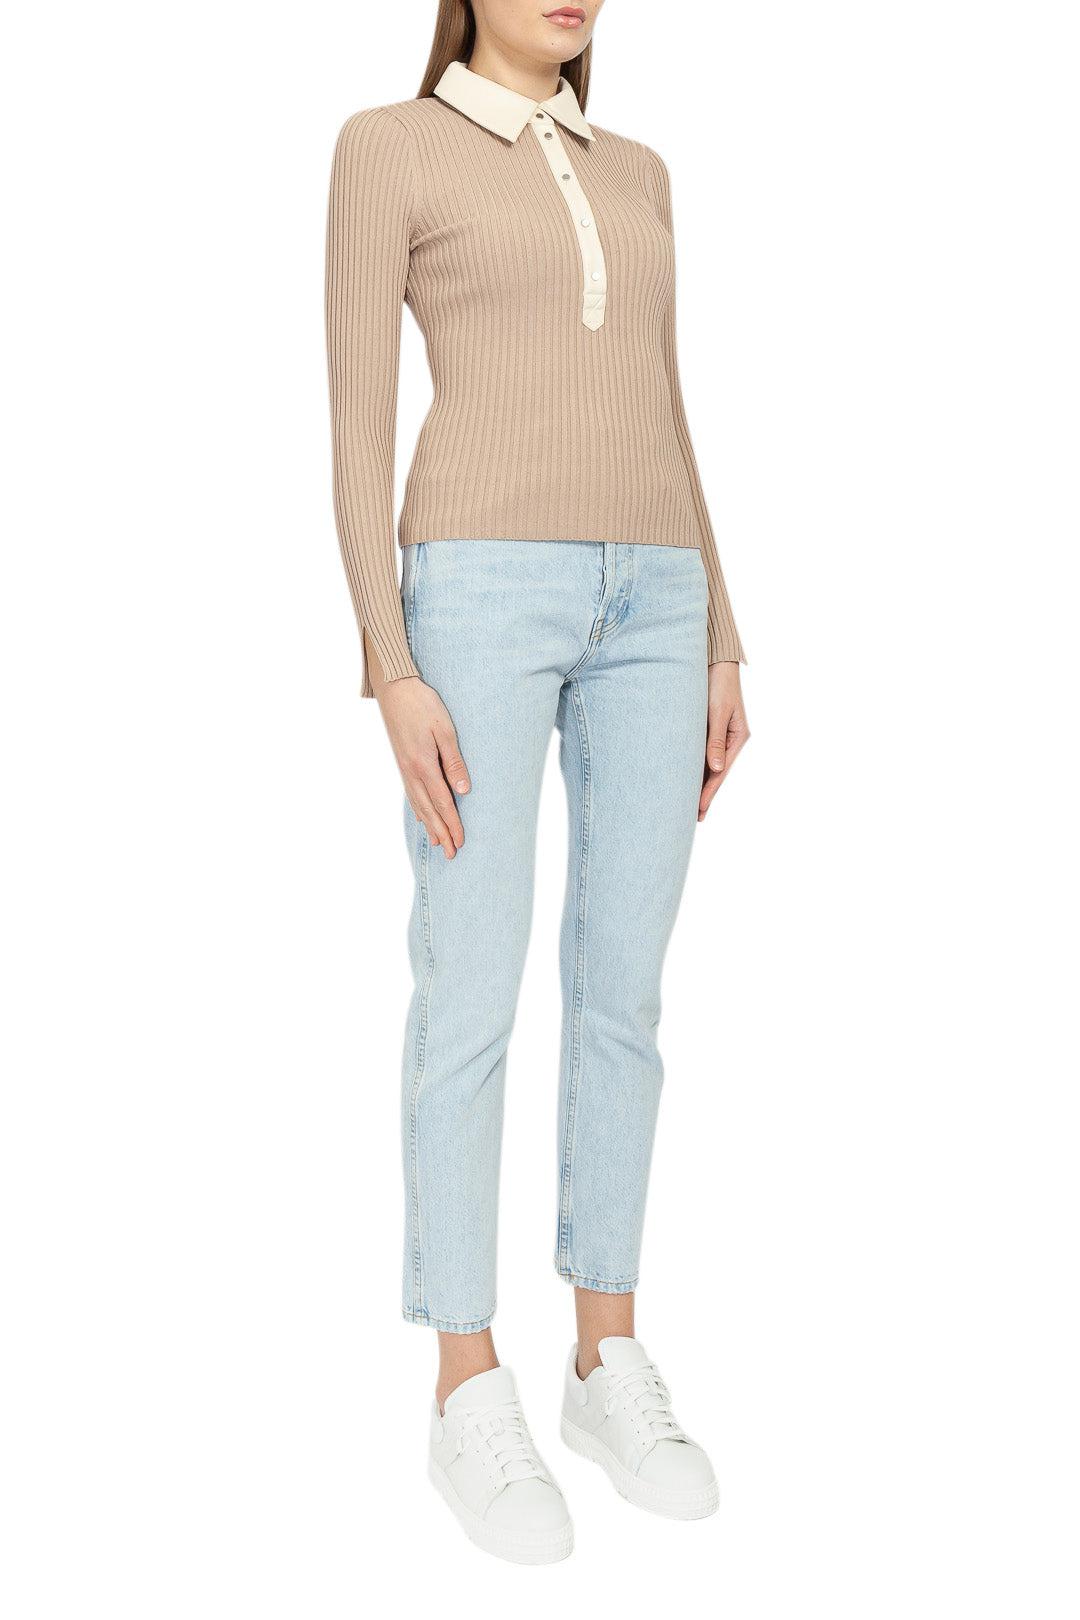 Simkhai-Ribbed sweater with classic collar-dgallerystore